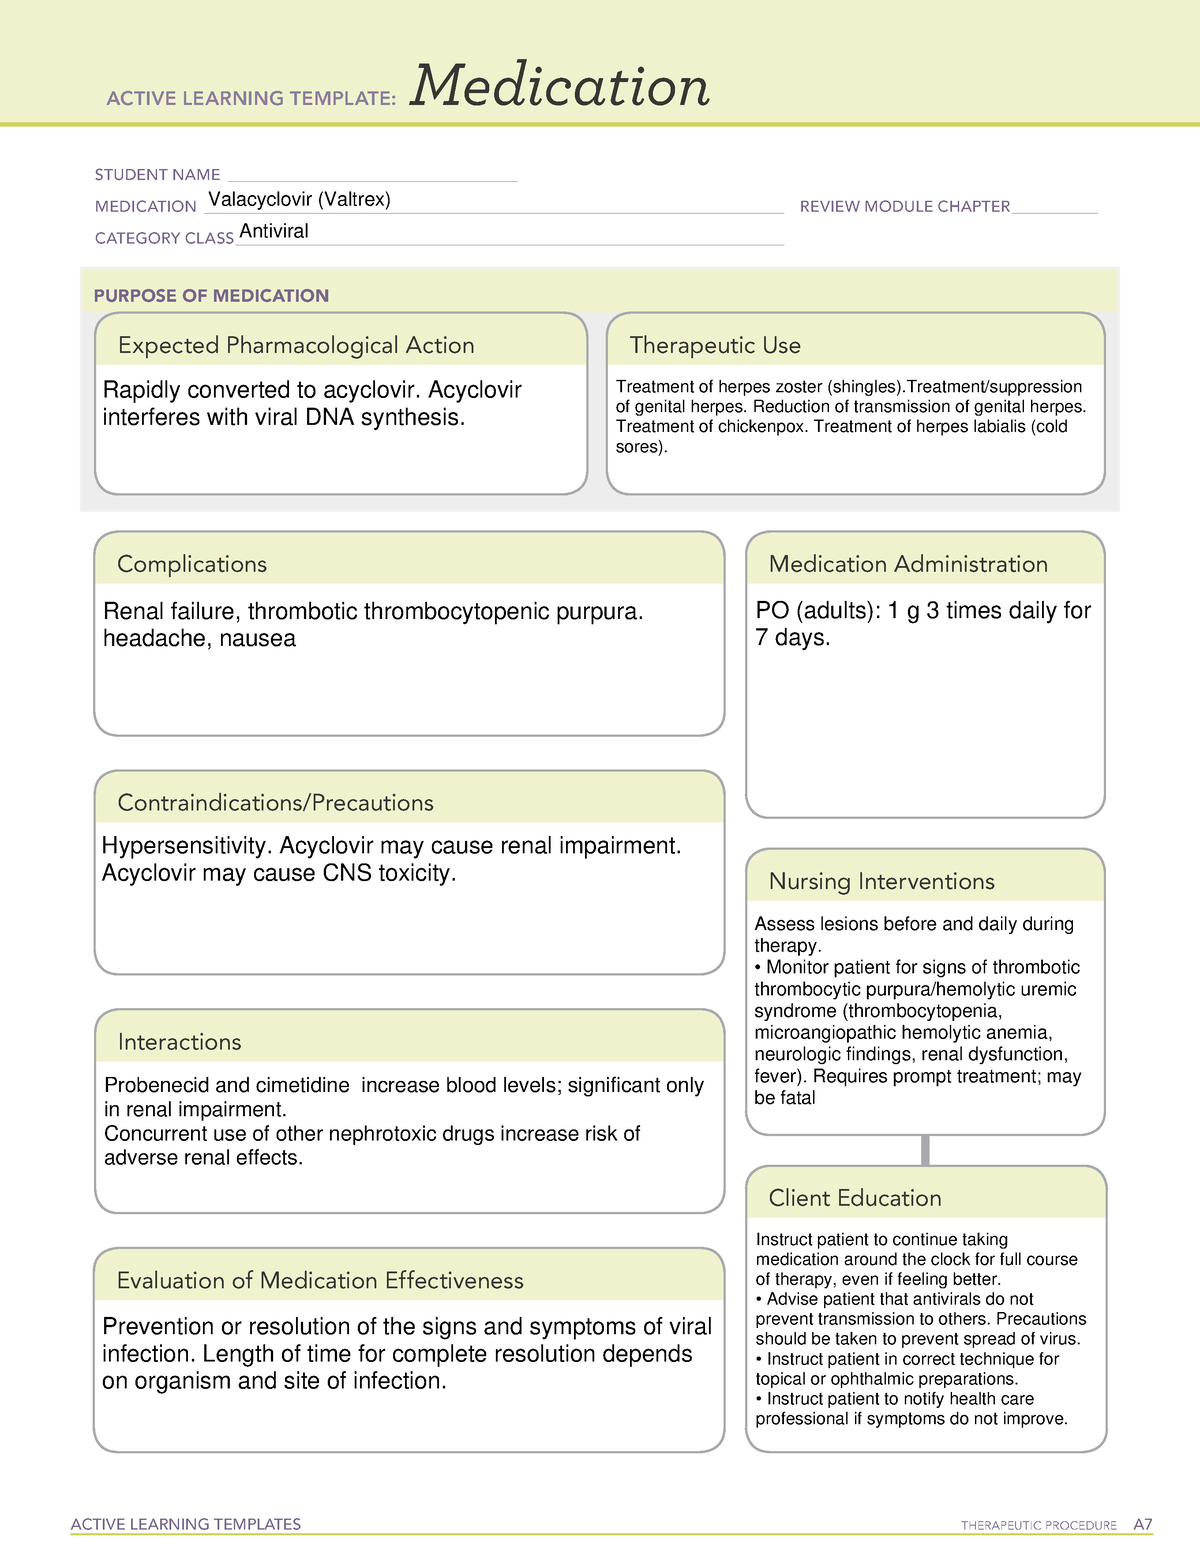 Active Learning Template medication Valacyclovir - ACTIVE LEARNING ...